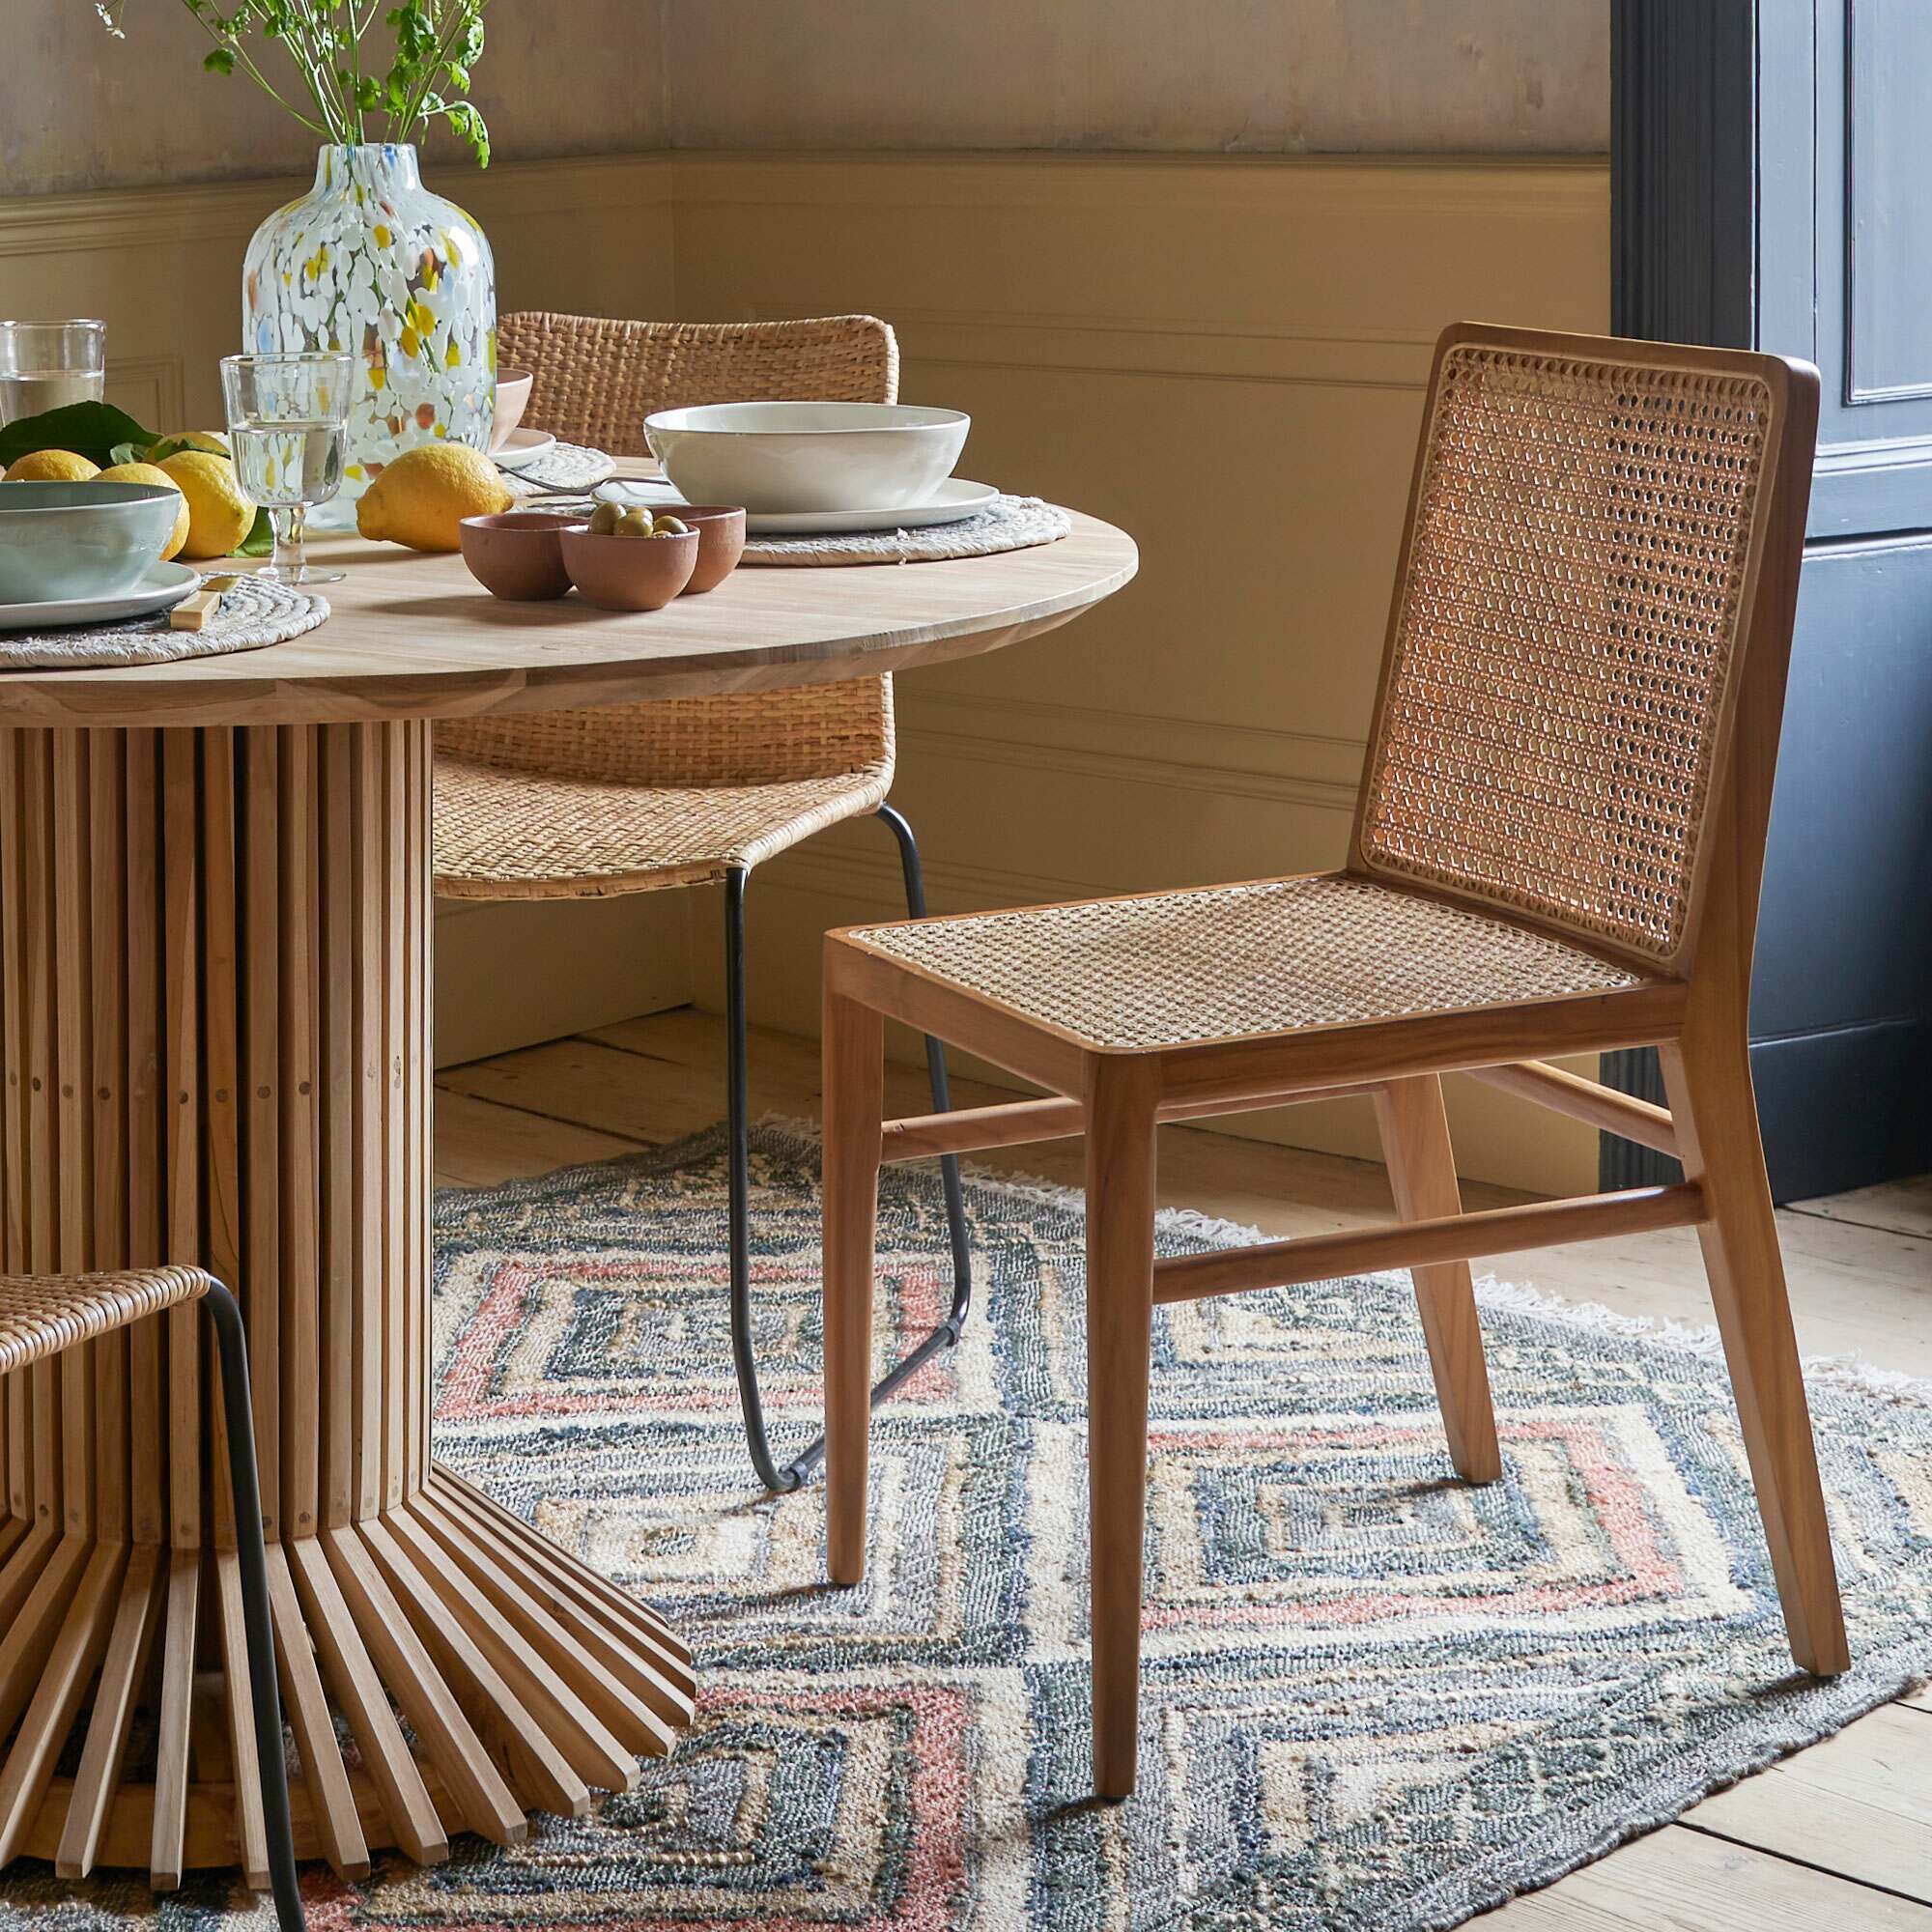 Read more about Graham and green nova cane rattan dining chair